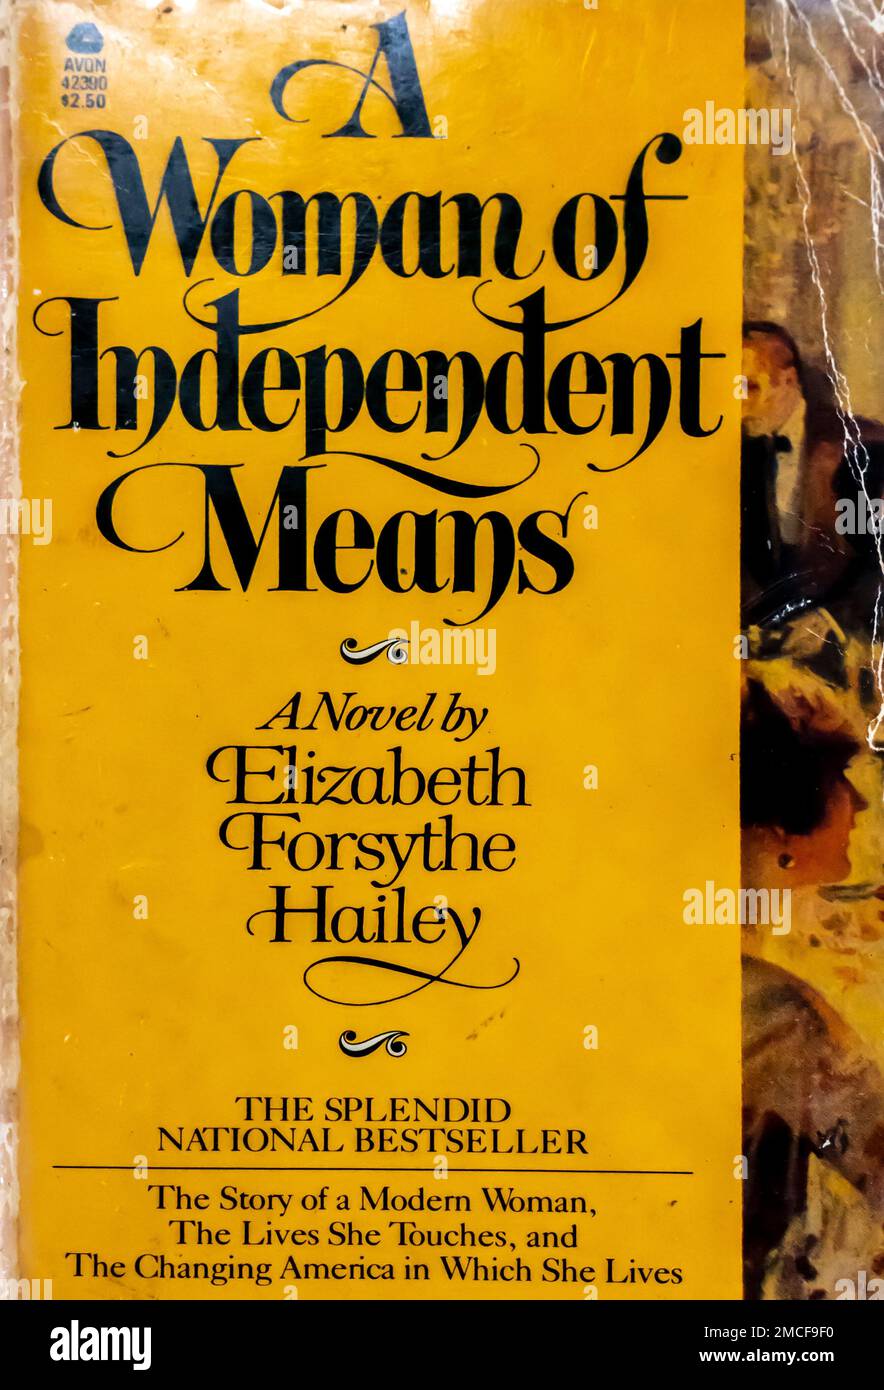 A woman of independent means Book by Elizabeth Forsythe Hailey 1978 Stock Photo